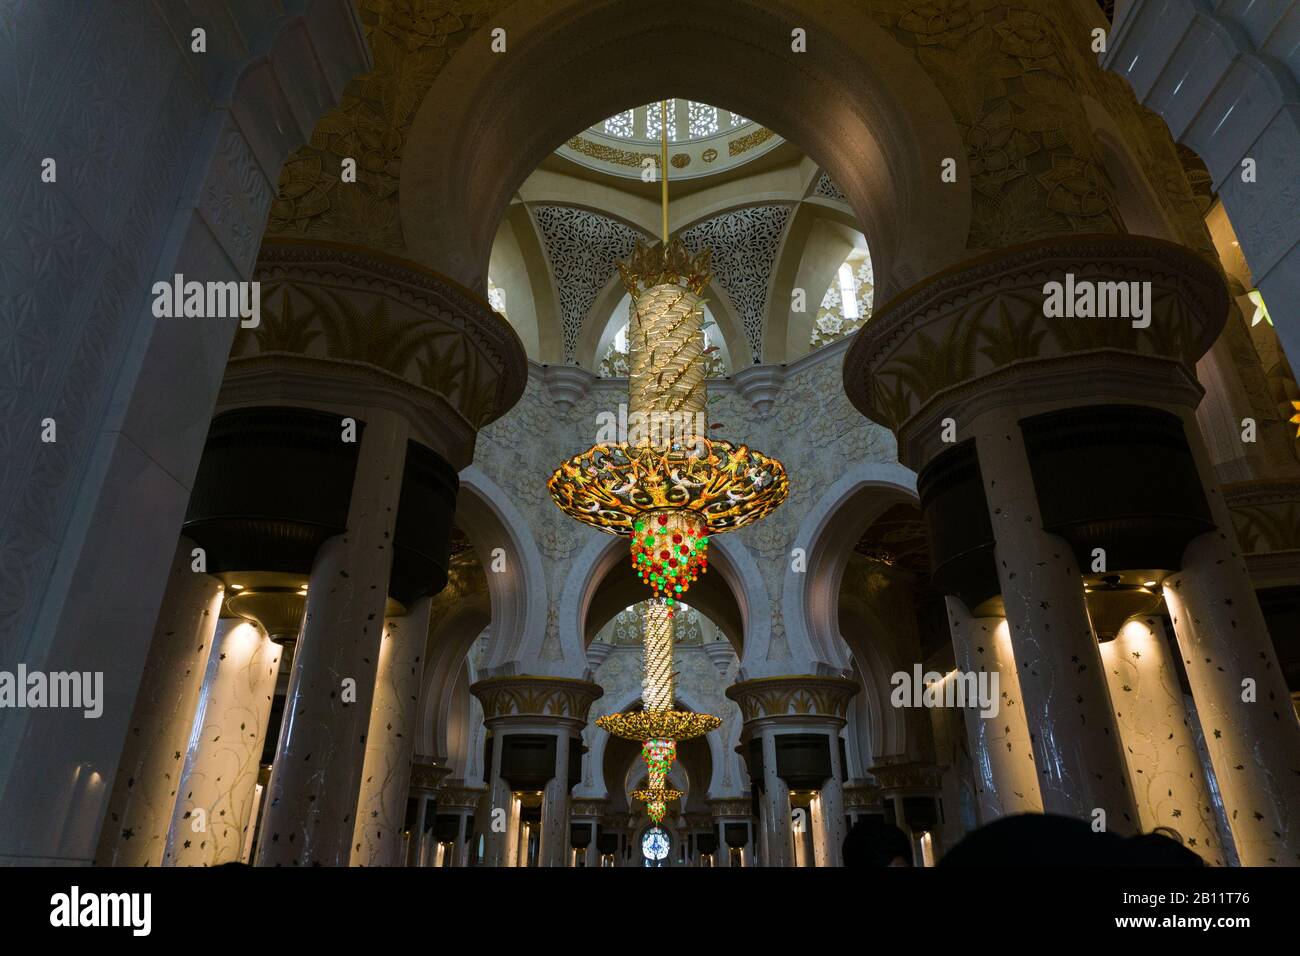 Ornate chandelier framed by arches inside the Sheikh Zayed Grand Mosque, Abu Dhabi Stock Photo